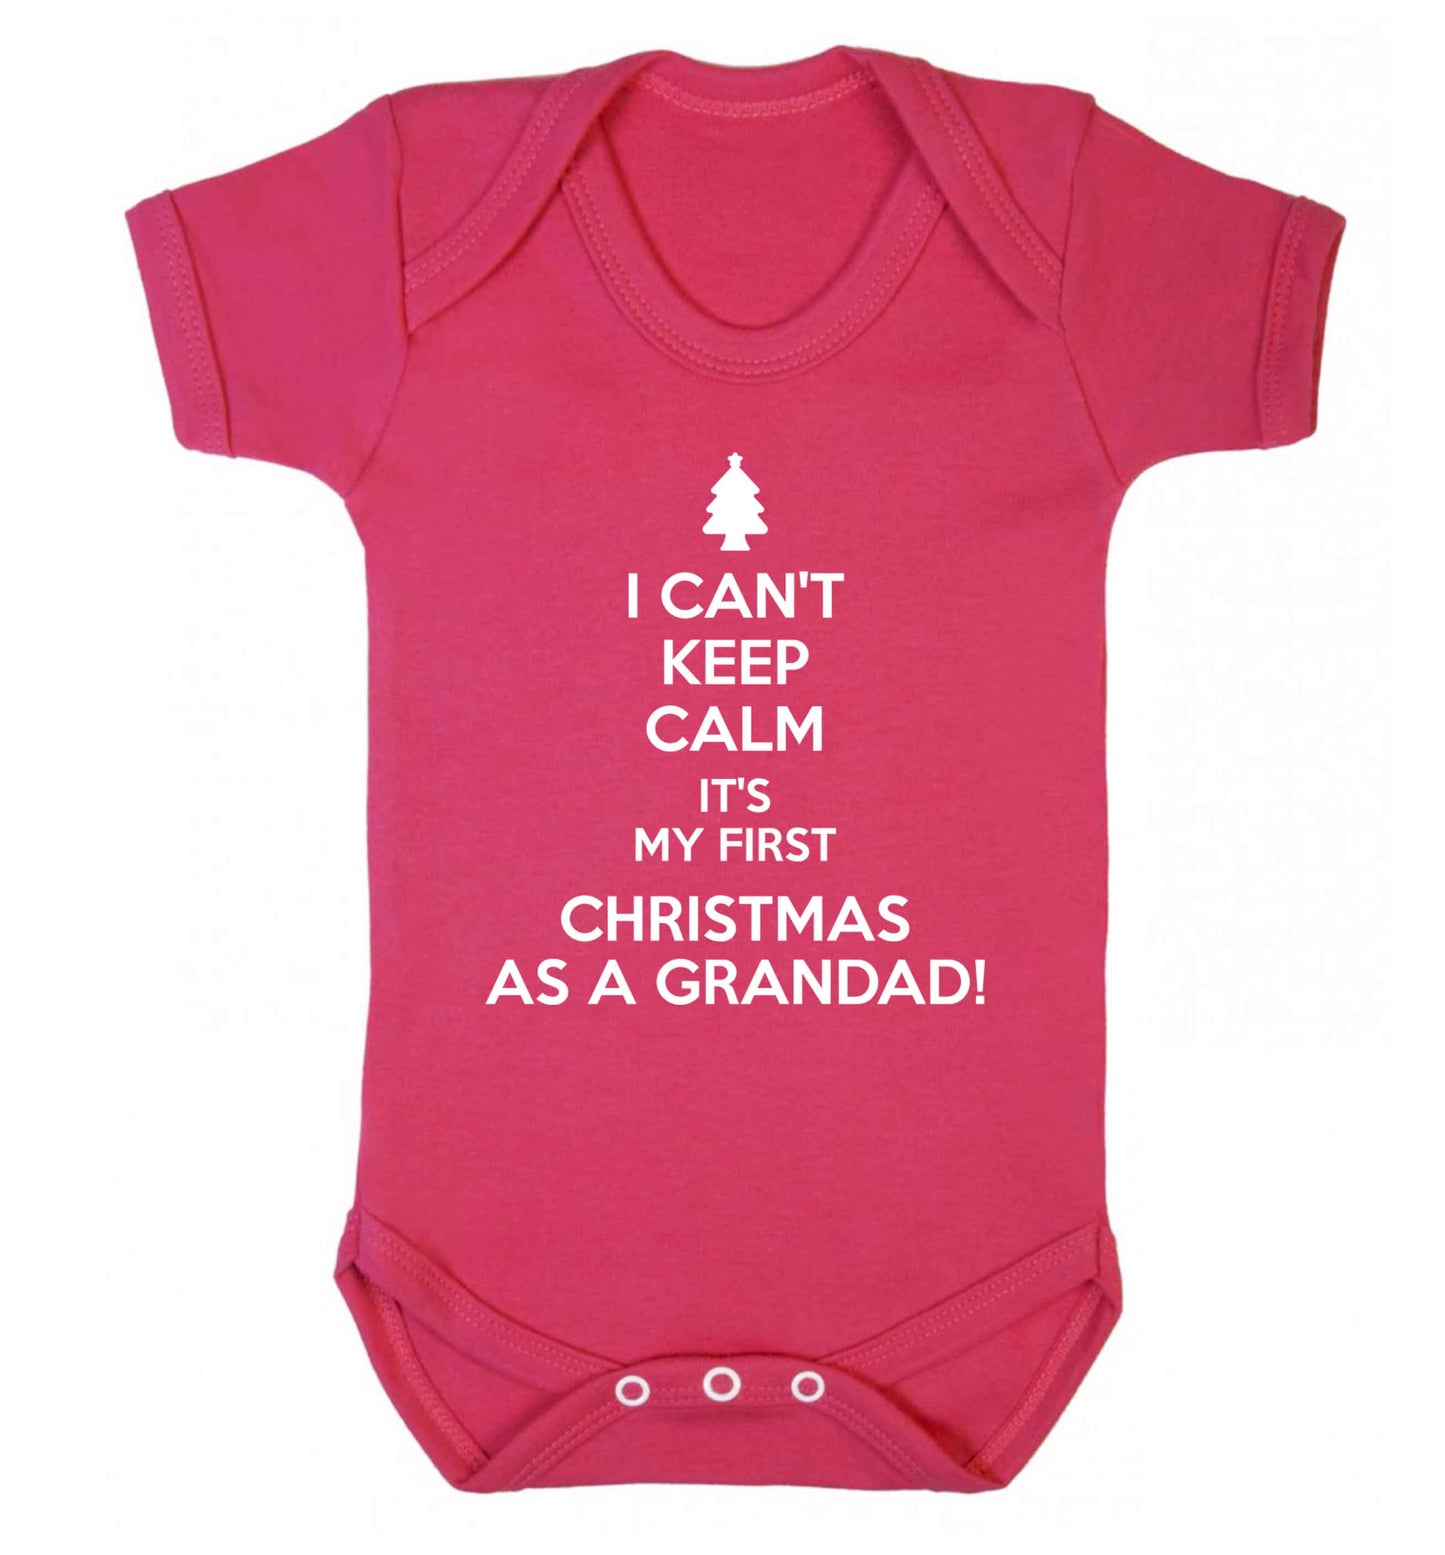 I can't keep calm it's my first Christmas as a grandad! Baby Vest dark pink 18-24 months